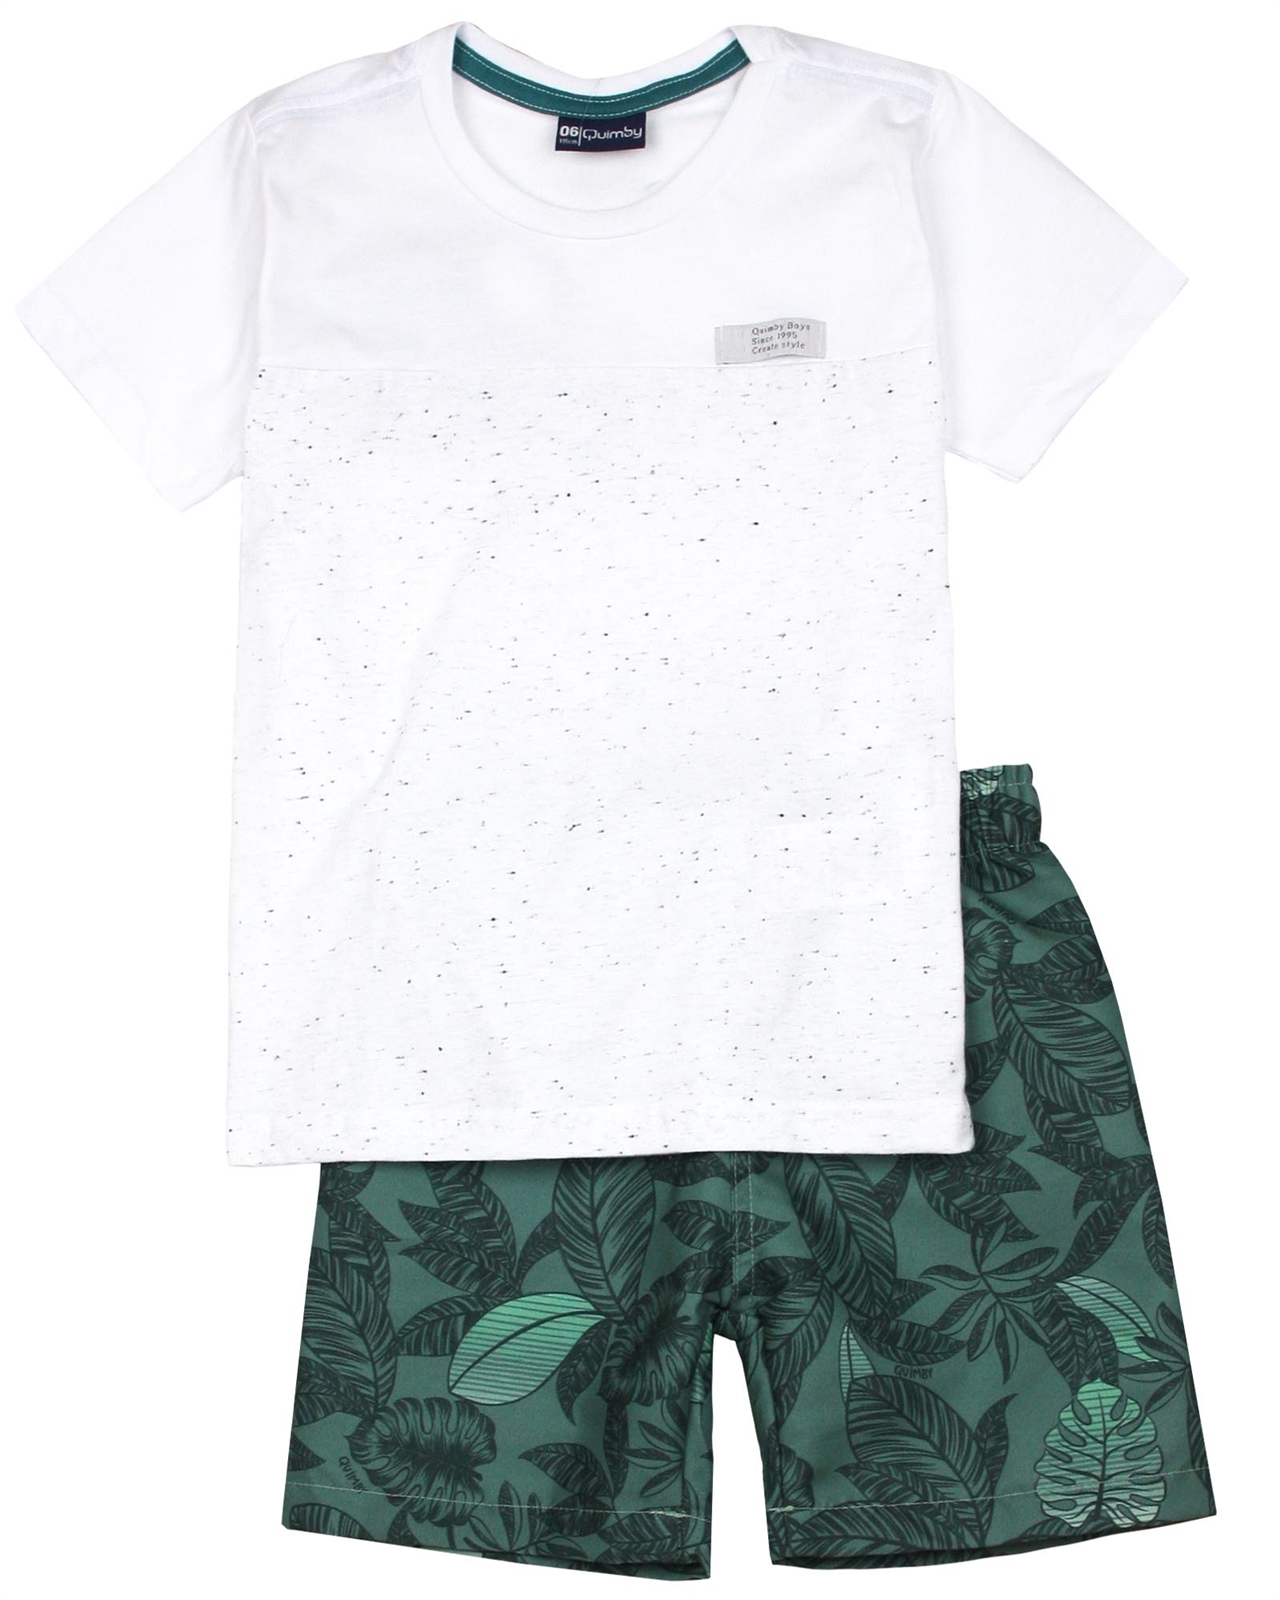 QUIMBY Boy's T-shirt and Swim Shorts Set in White/Green, Sizes 2-12